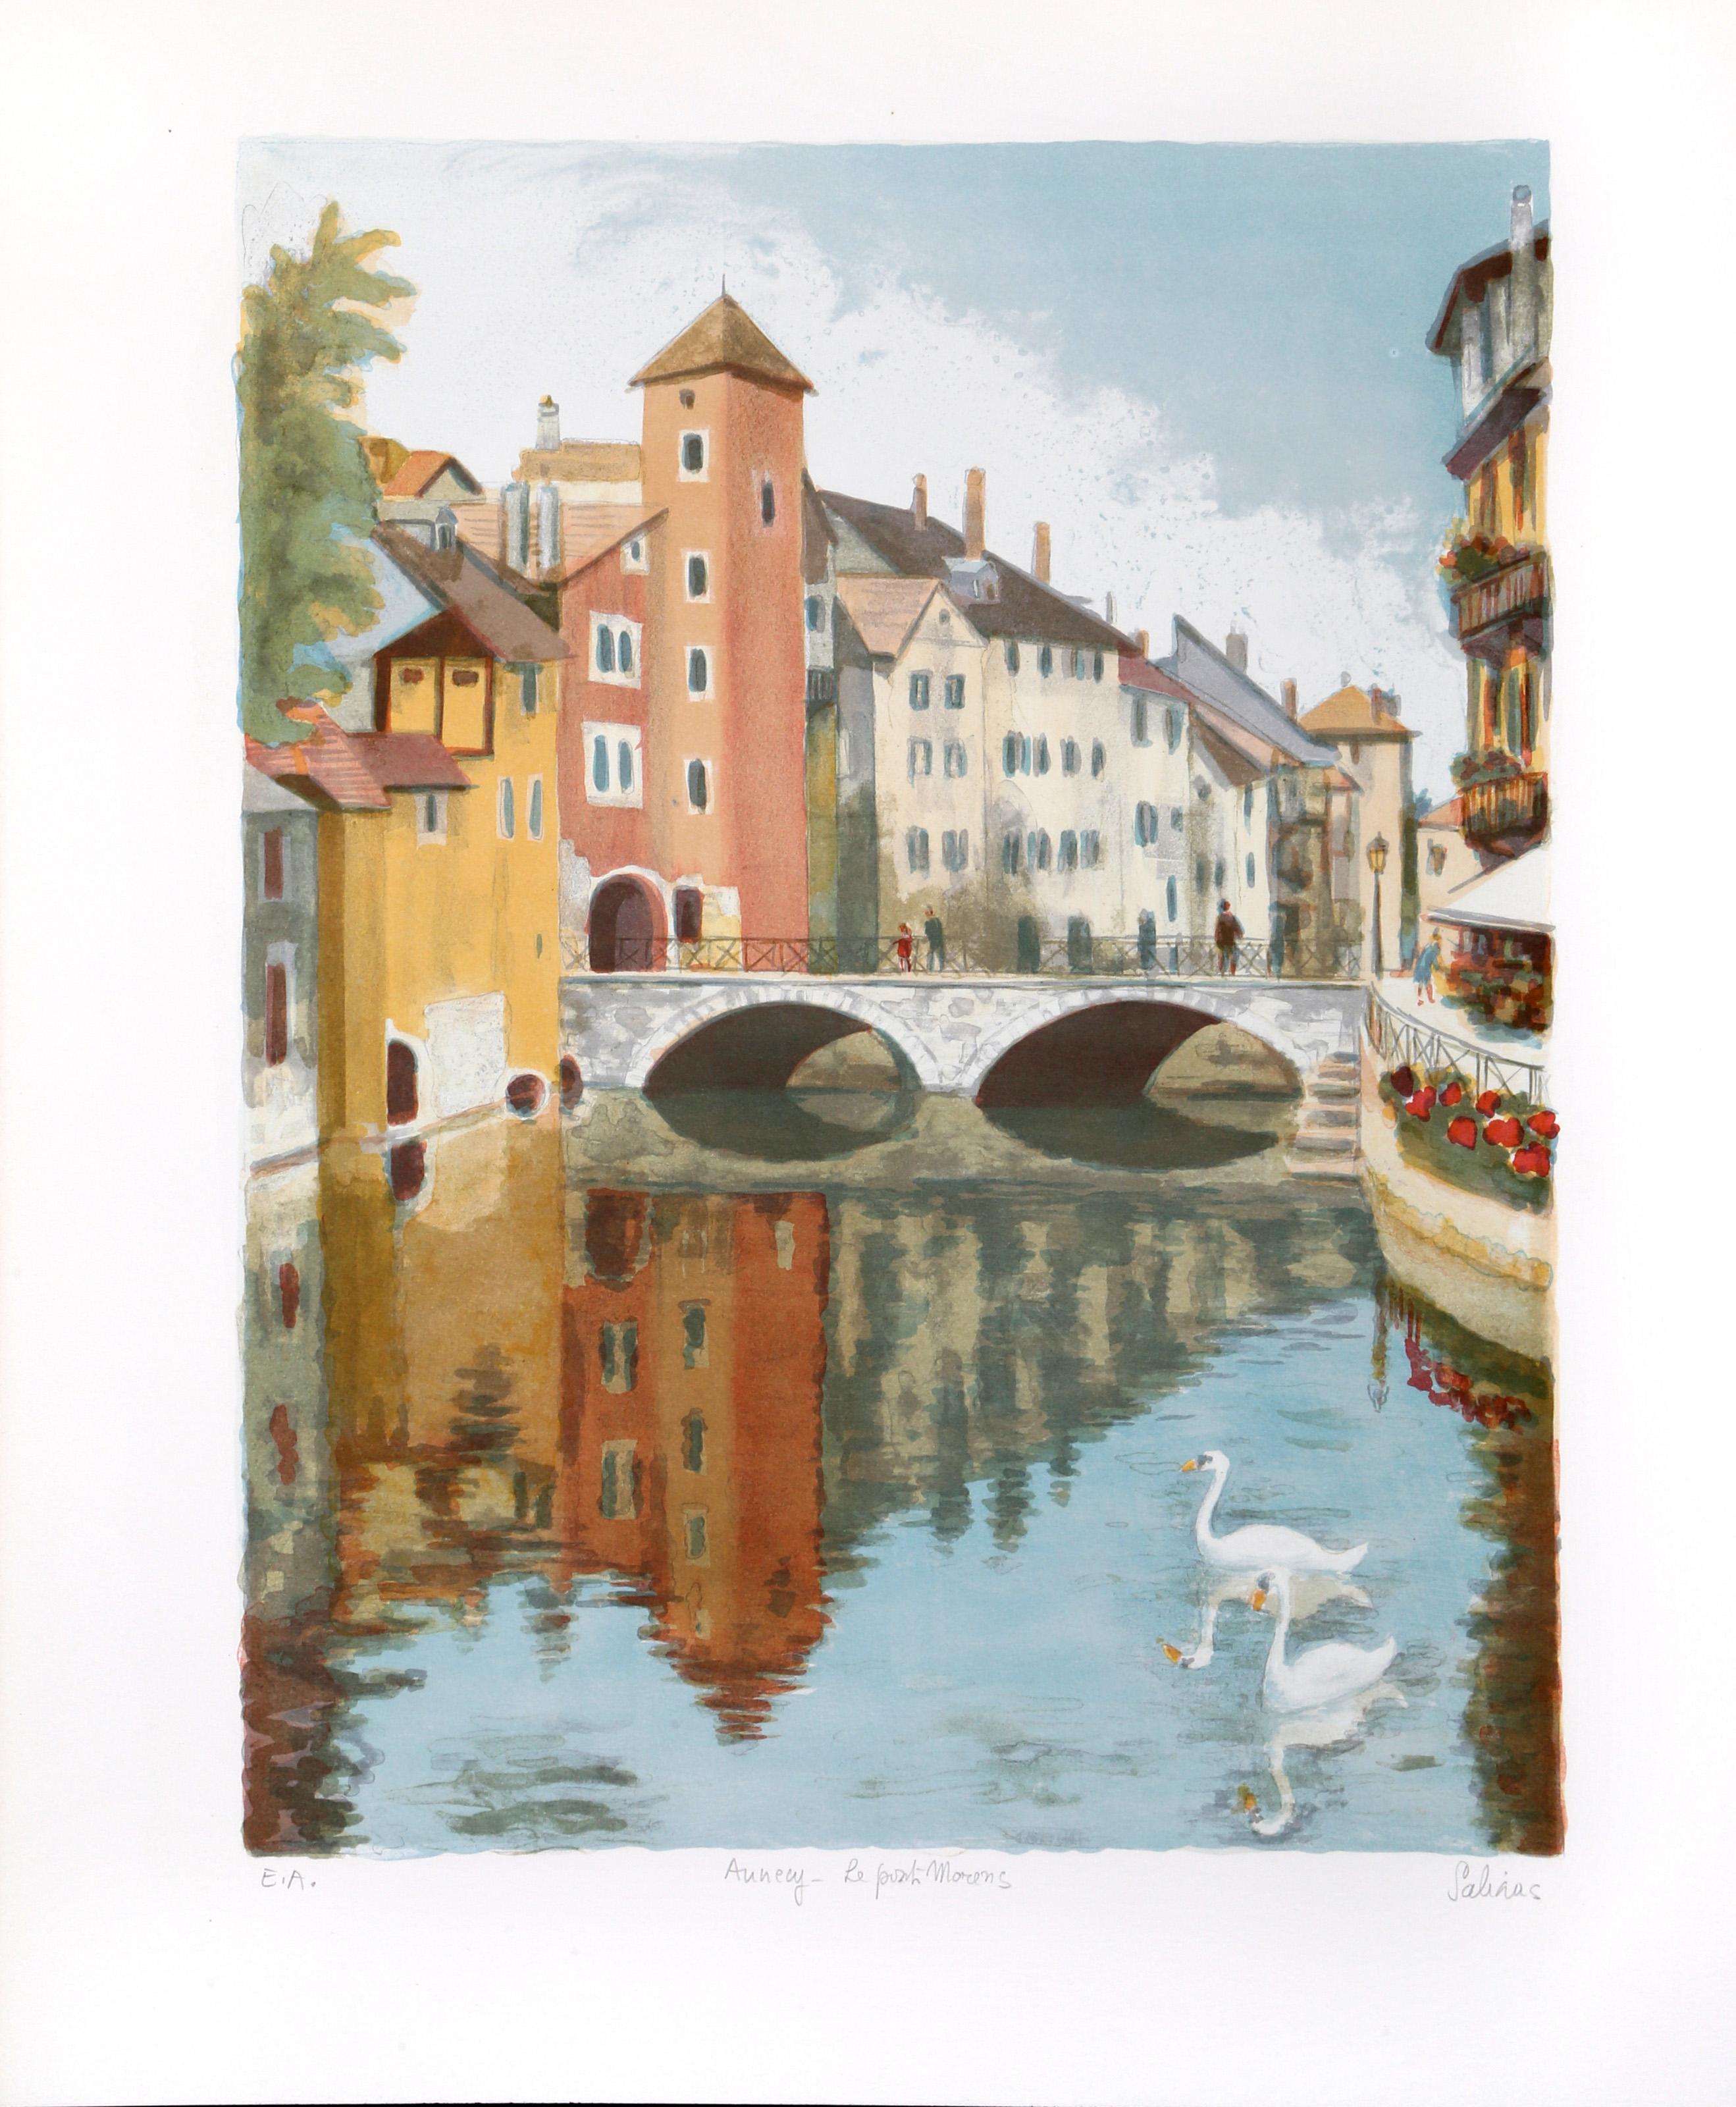 Laurent Marcel Salinas, Egyptian/French (1913 - 2010) -  Annecy - Le Pont Morens. Year: circa 1980, Medium: Lithograph, signed in pencil, Edition: EA, Image Size: 18 x 13.5 inches, Size: 22  x 18.5 in. (55.88  x 46.99 cm) 